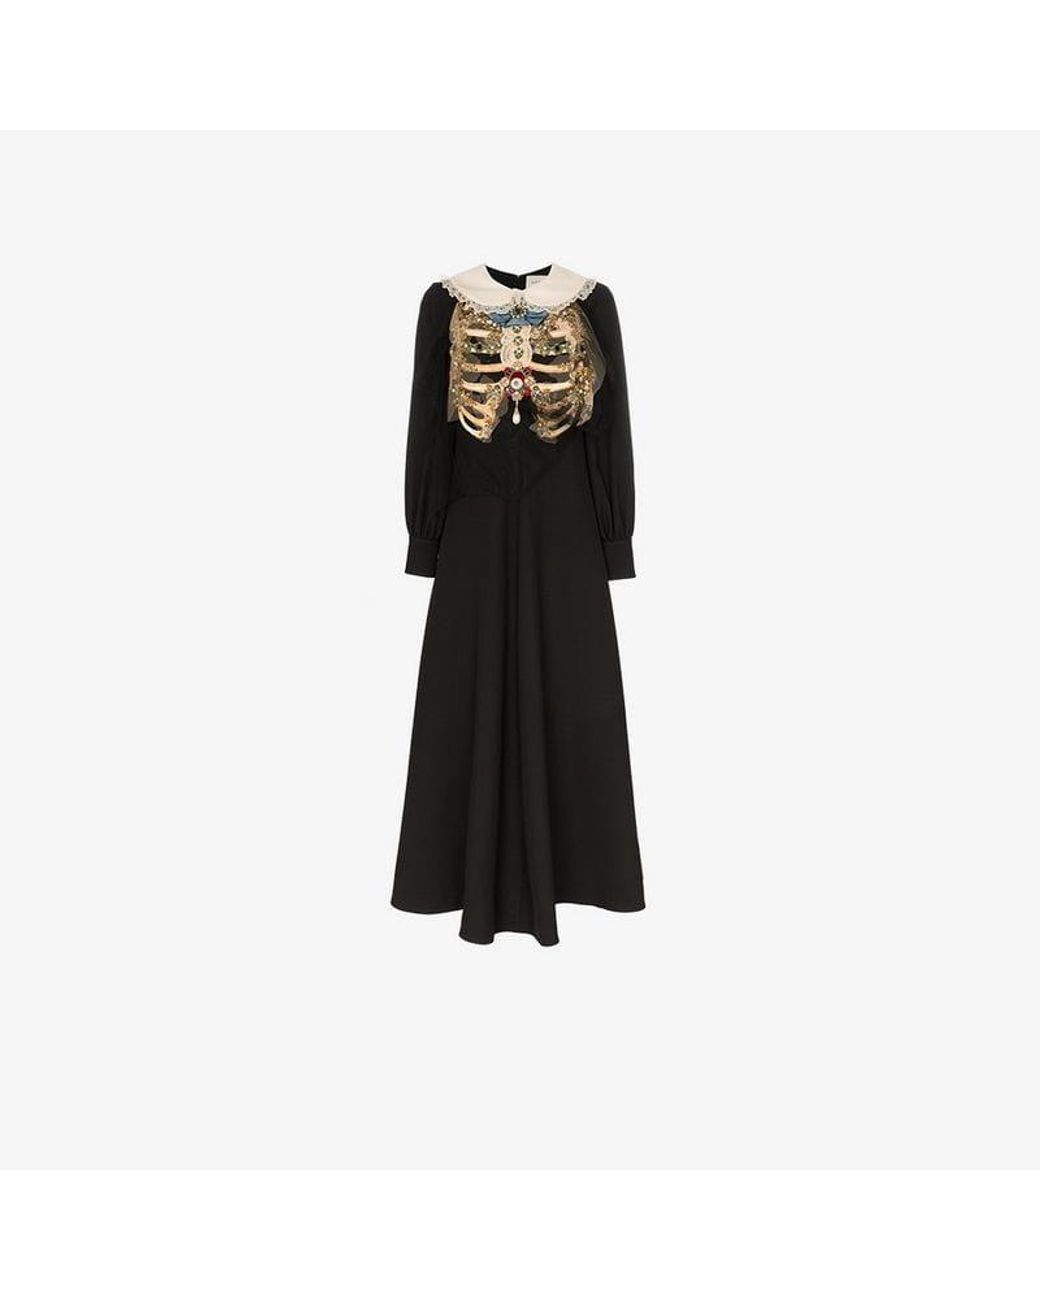 Gucci Embellished Ribcage Wool And Silk Dress in Black | Lyst